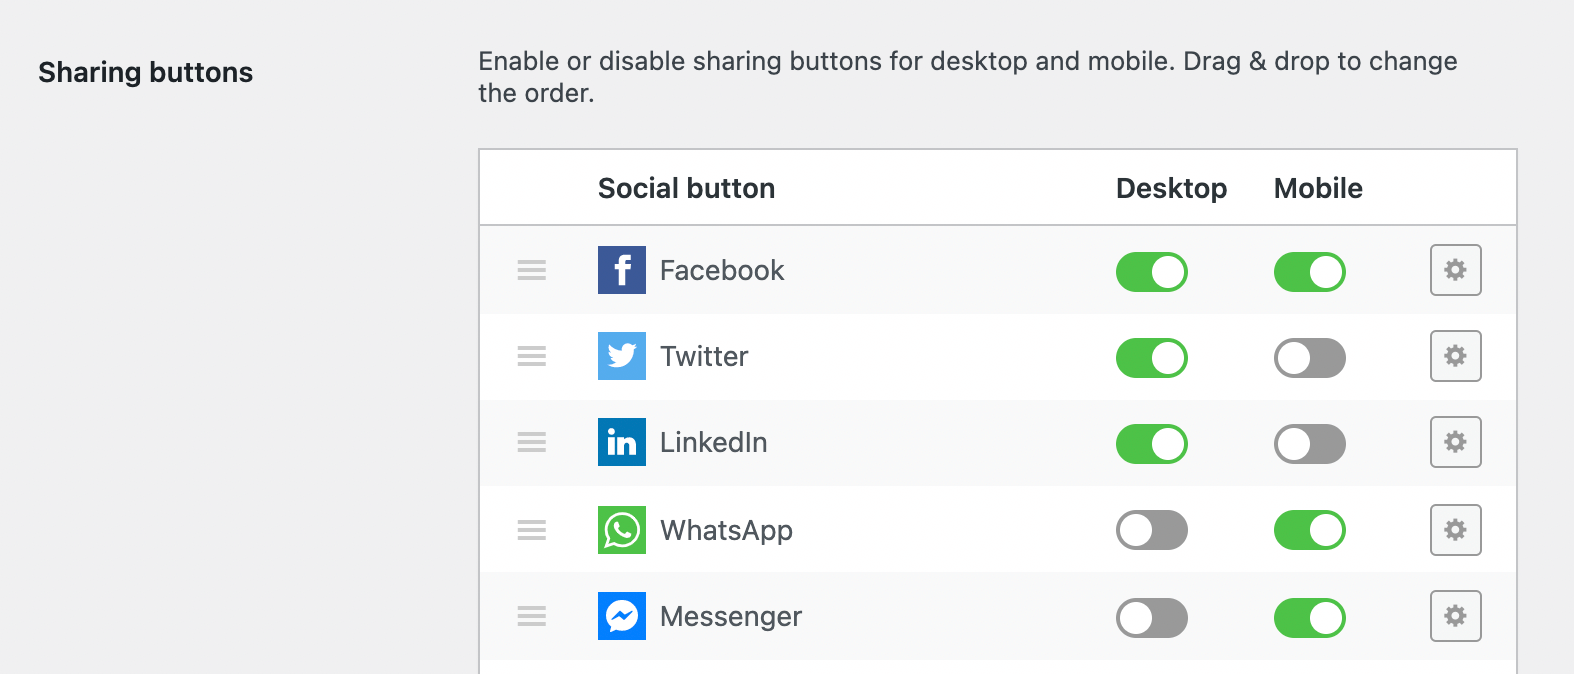 Sharing buttons visibility options